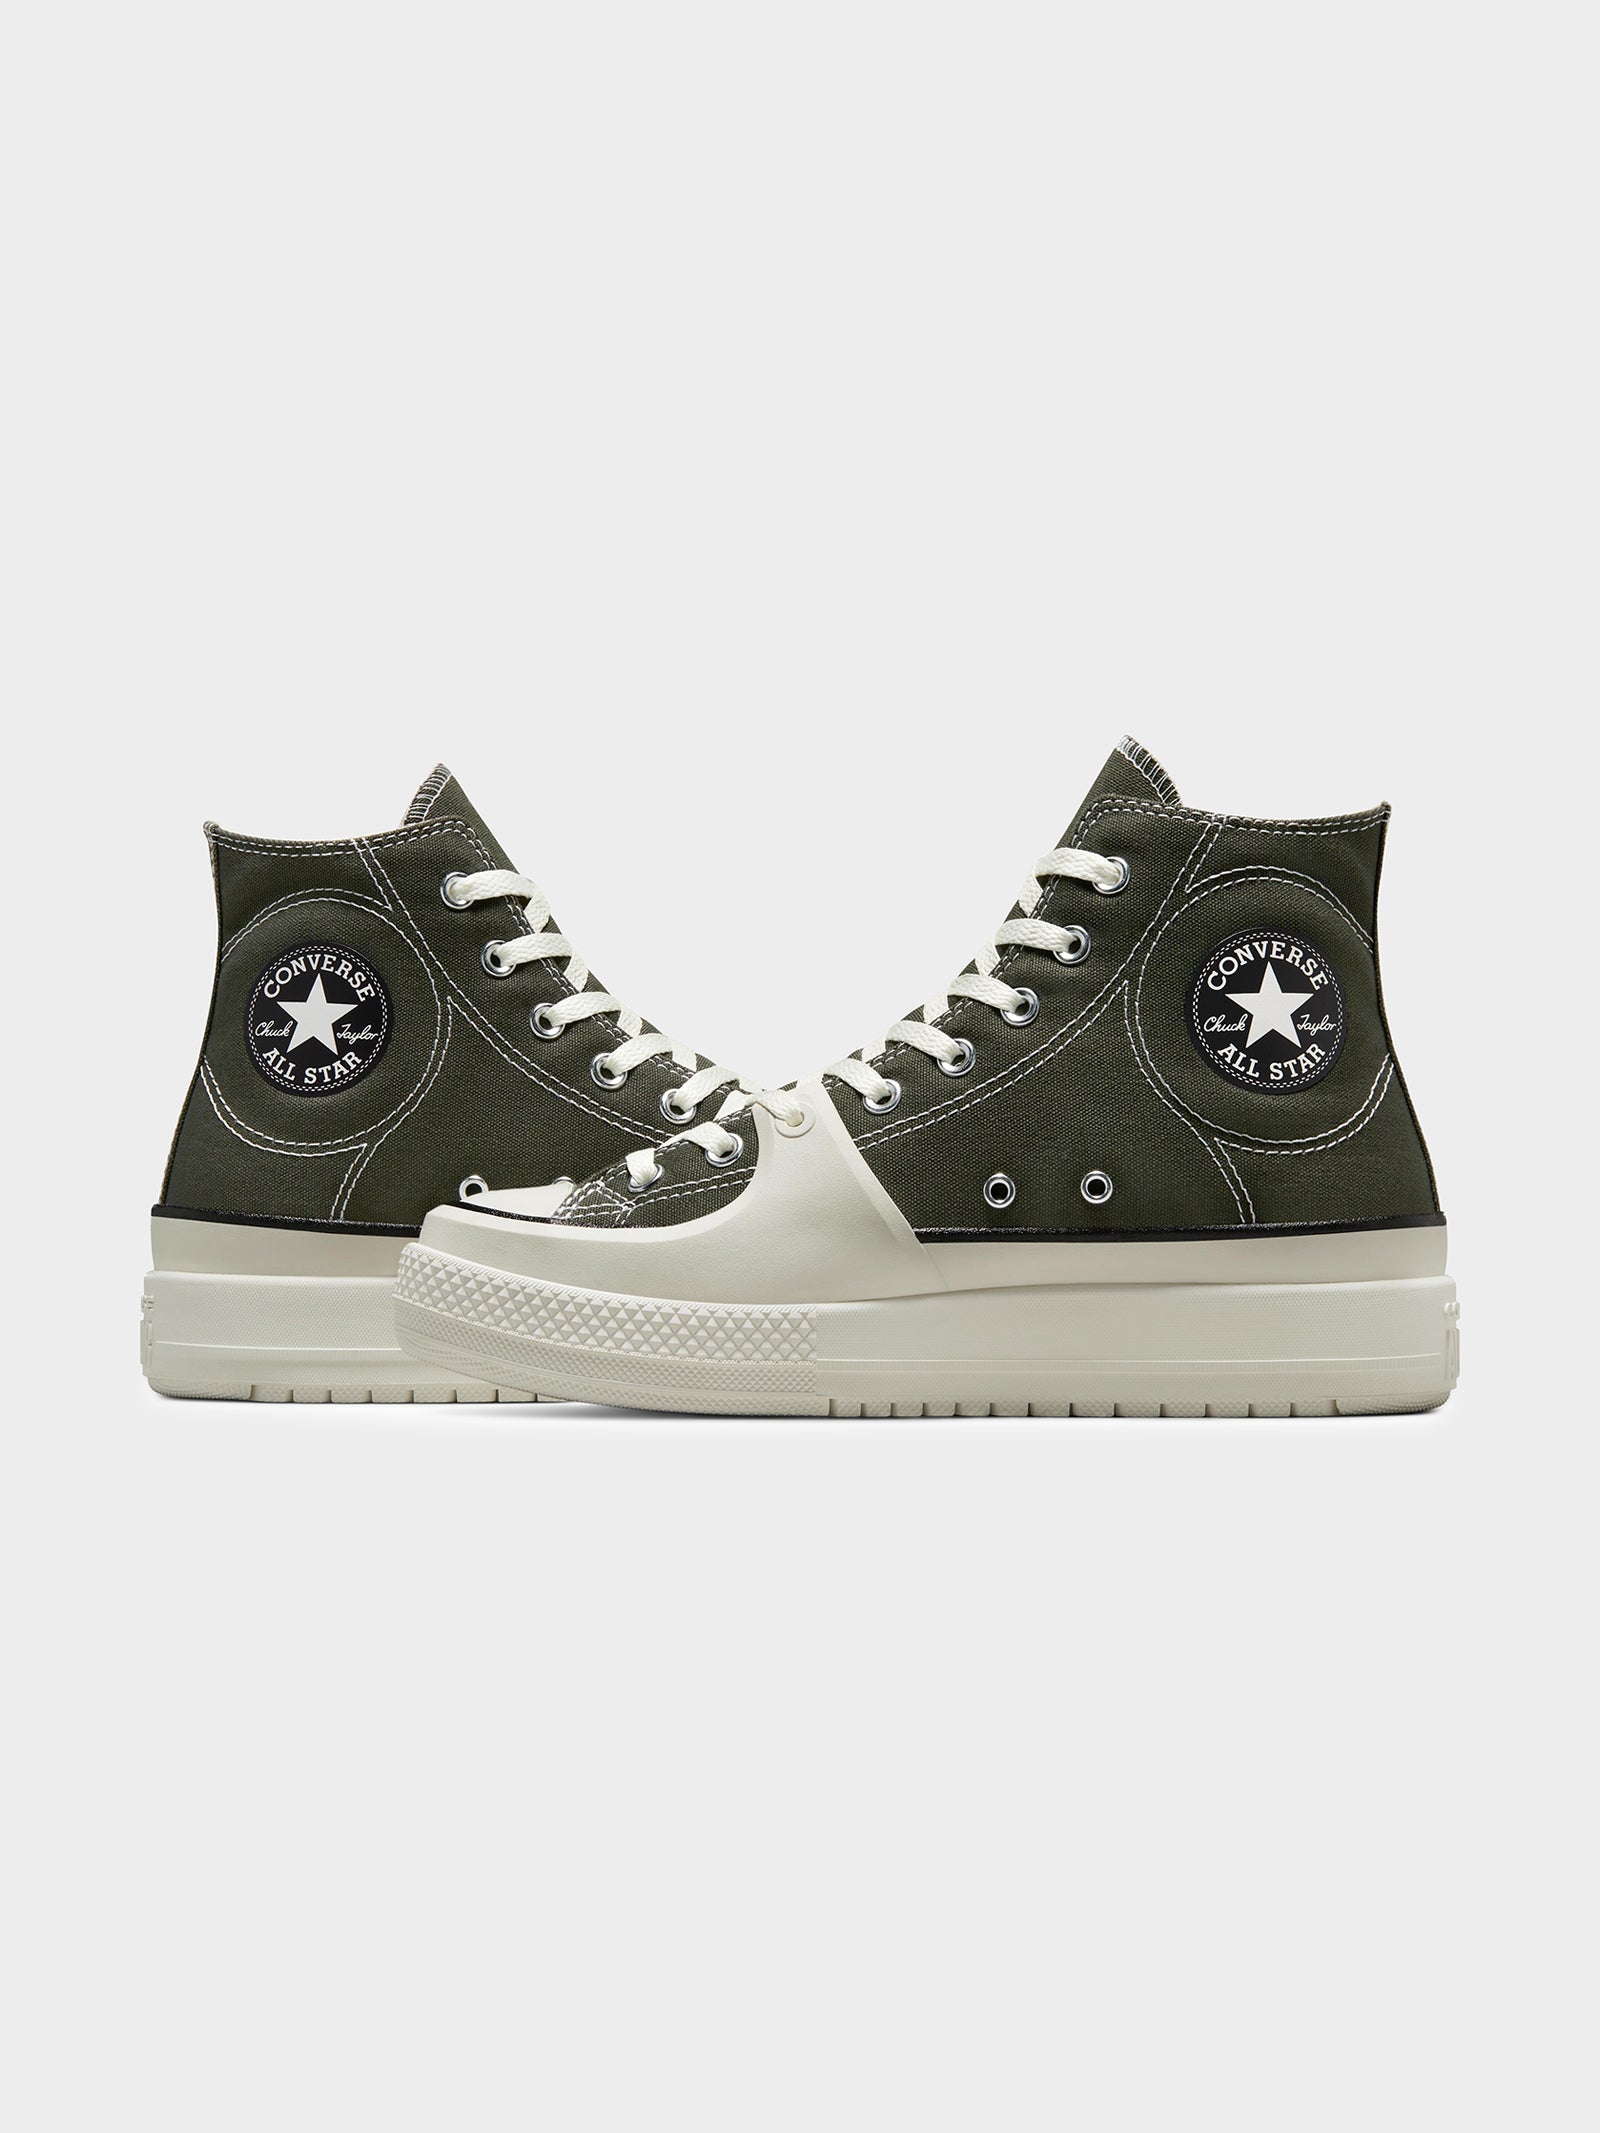 Unisex Chuck Taylor All Star Construct Deco Stitch High Top Sneakers in Cave Green